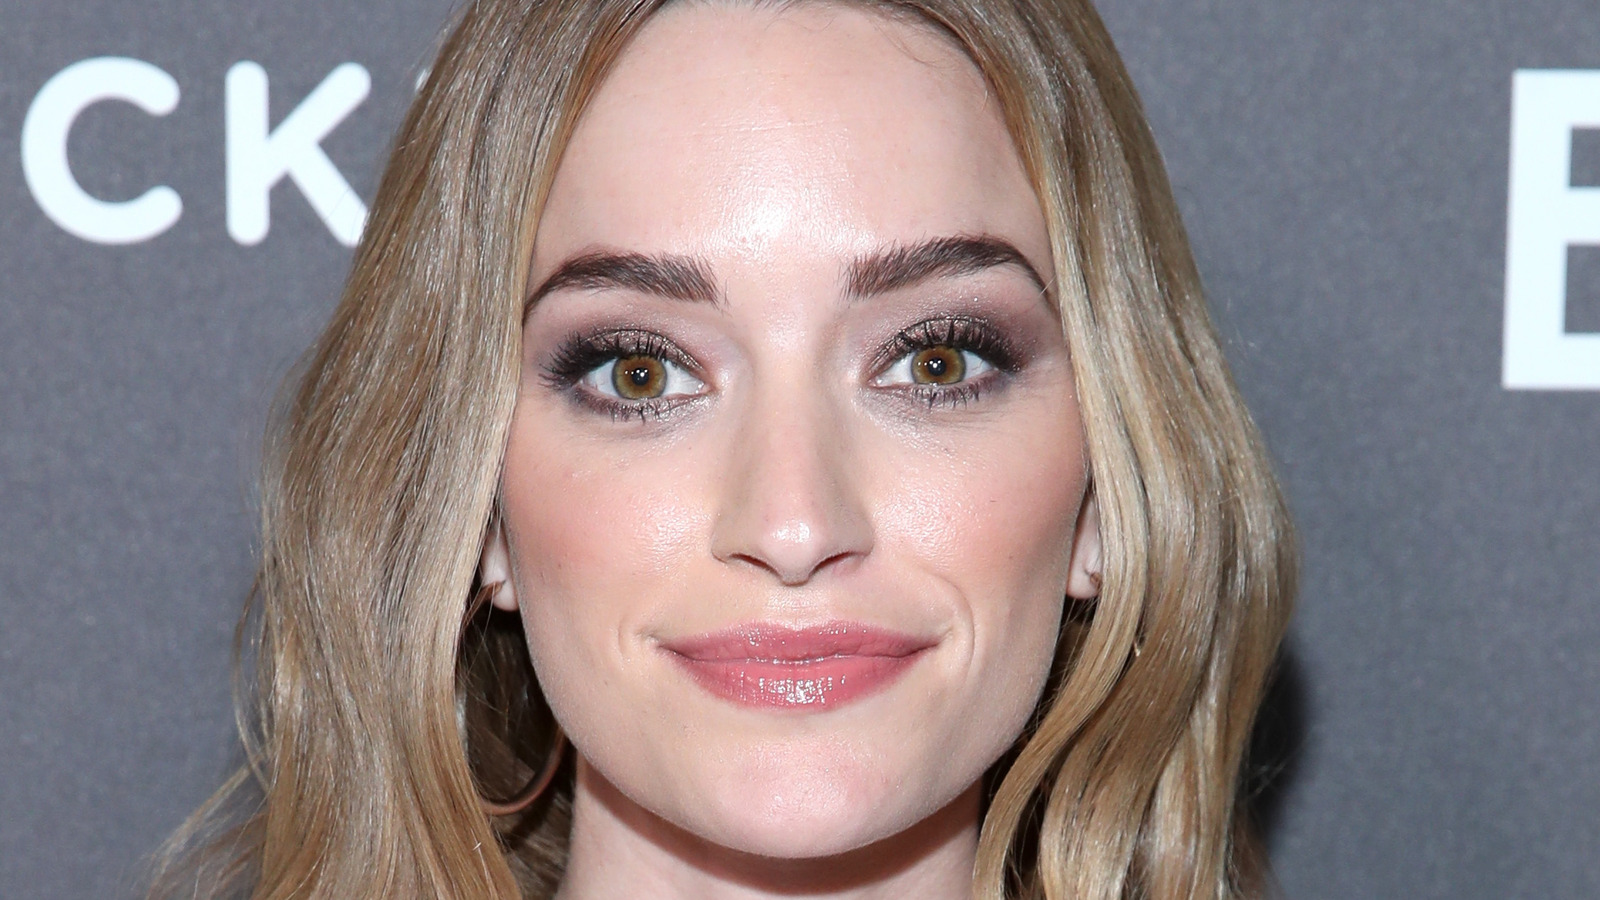 The true story of how brianne howey met her fiance